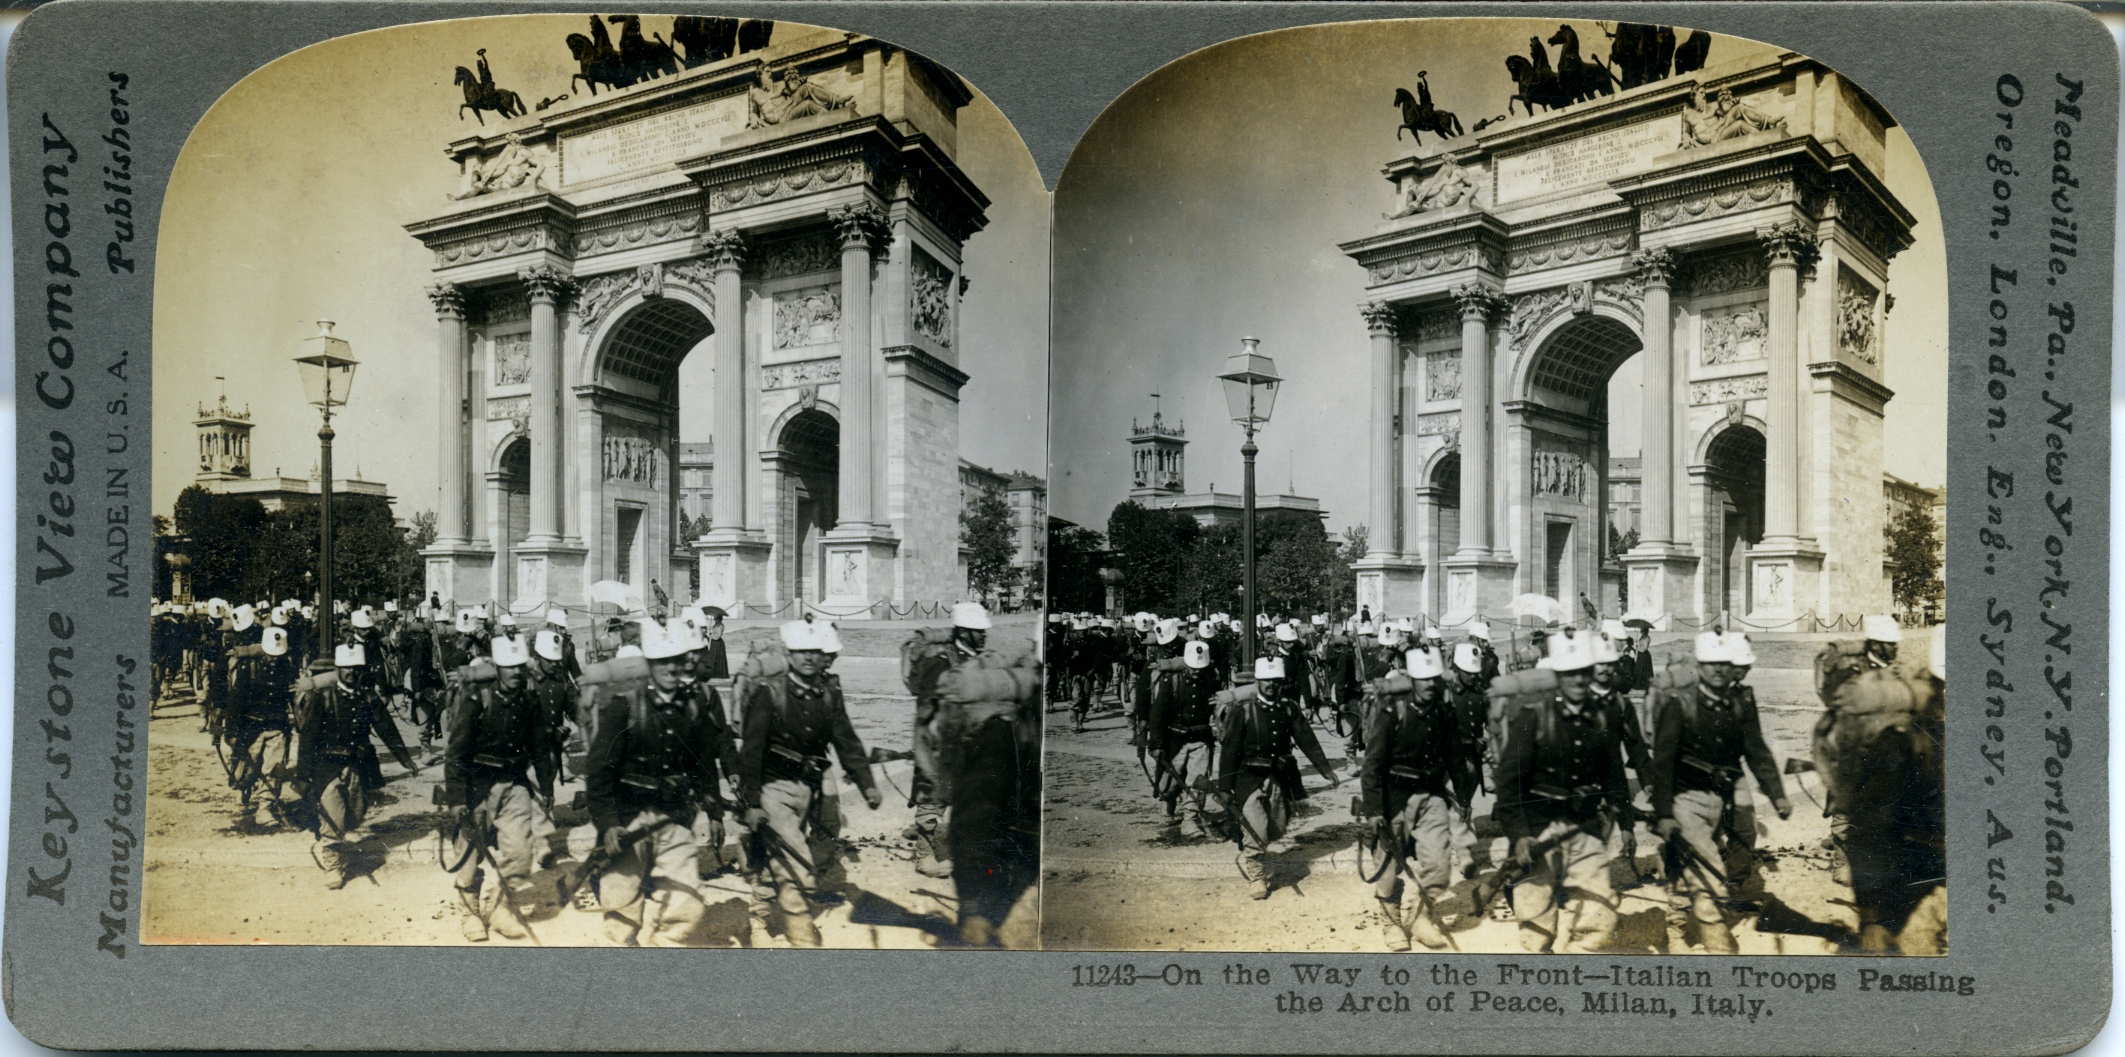 On the way to the front, Italian troops passing the Arch of Peace, Milan